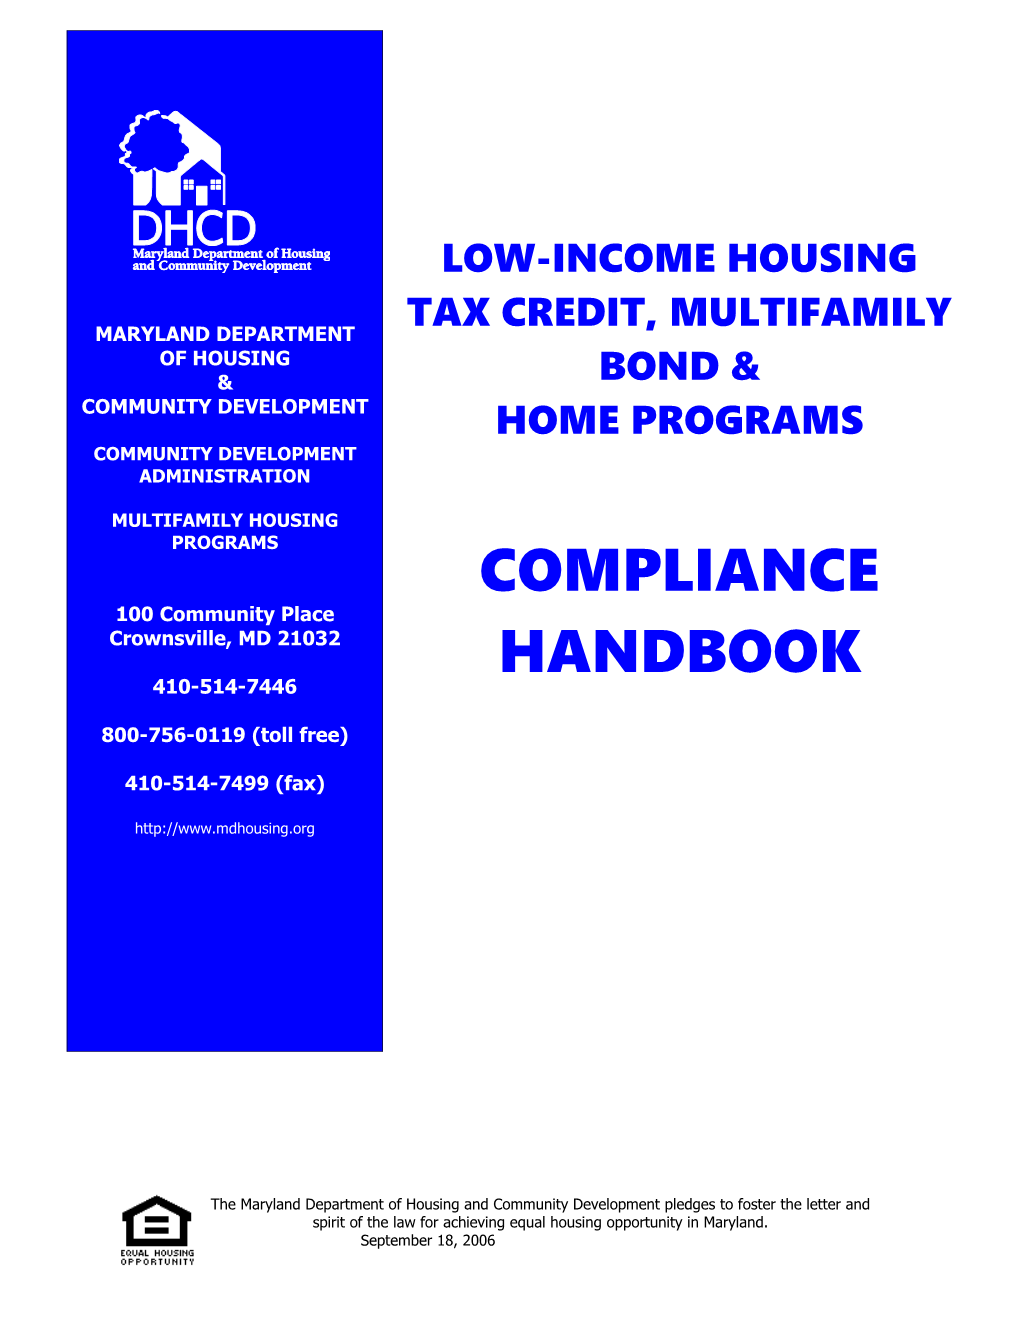 Low-Income Housing Tax Credit,Multifamily Bond